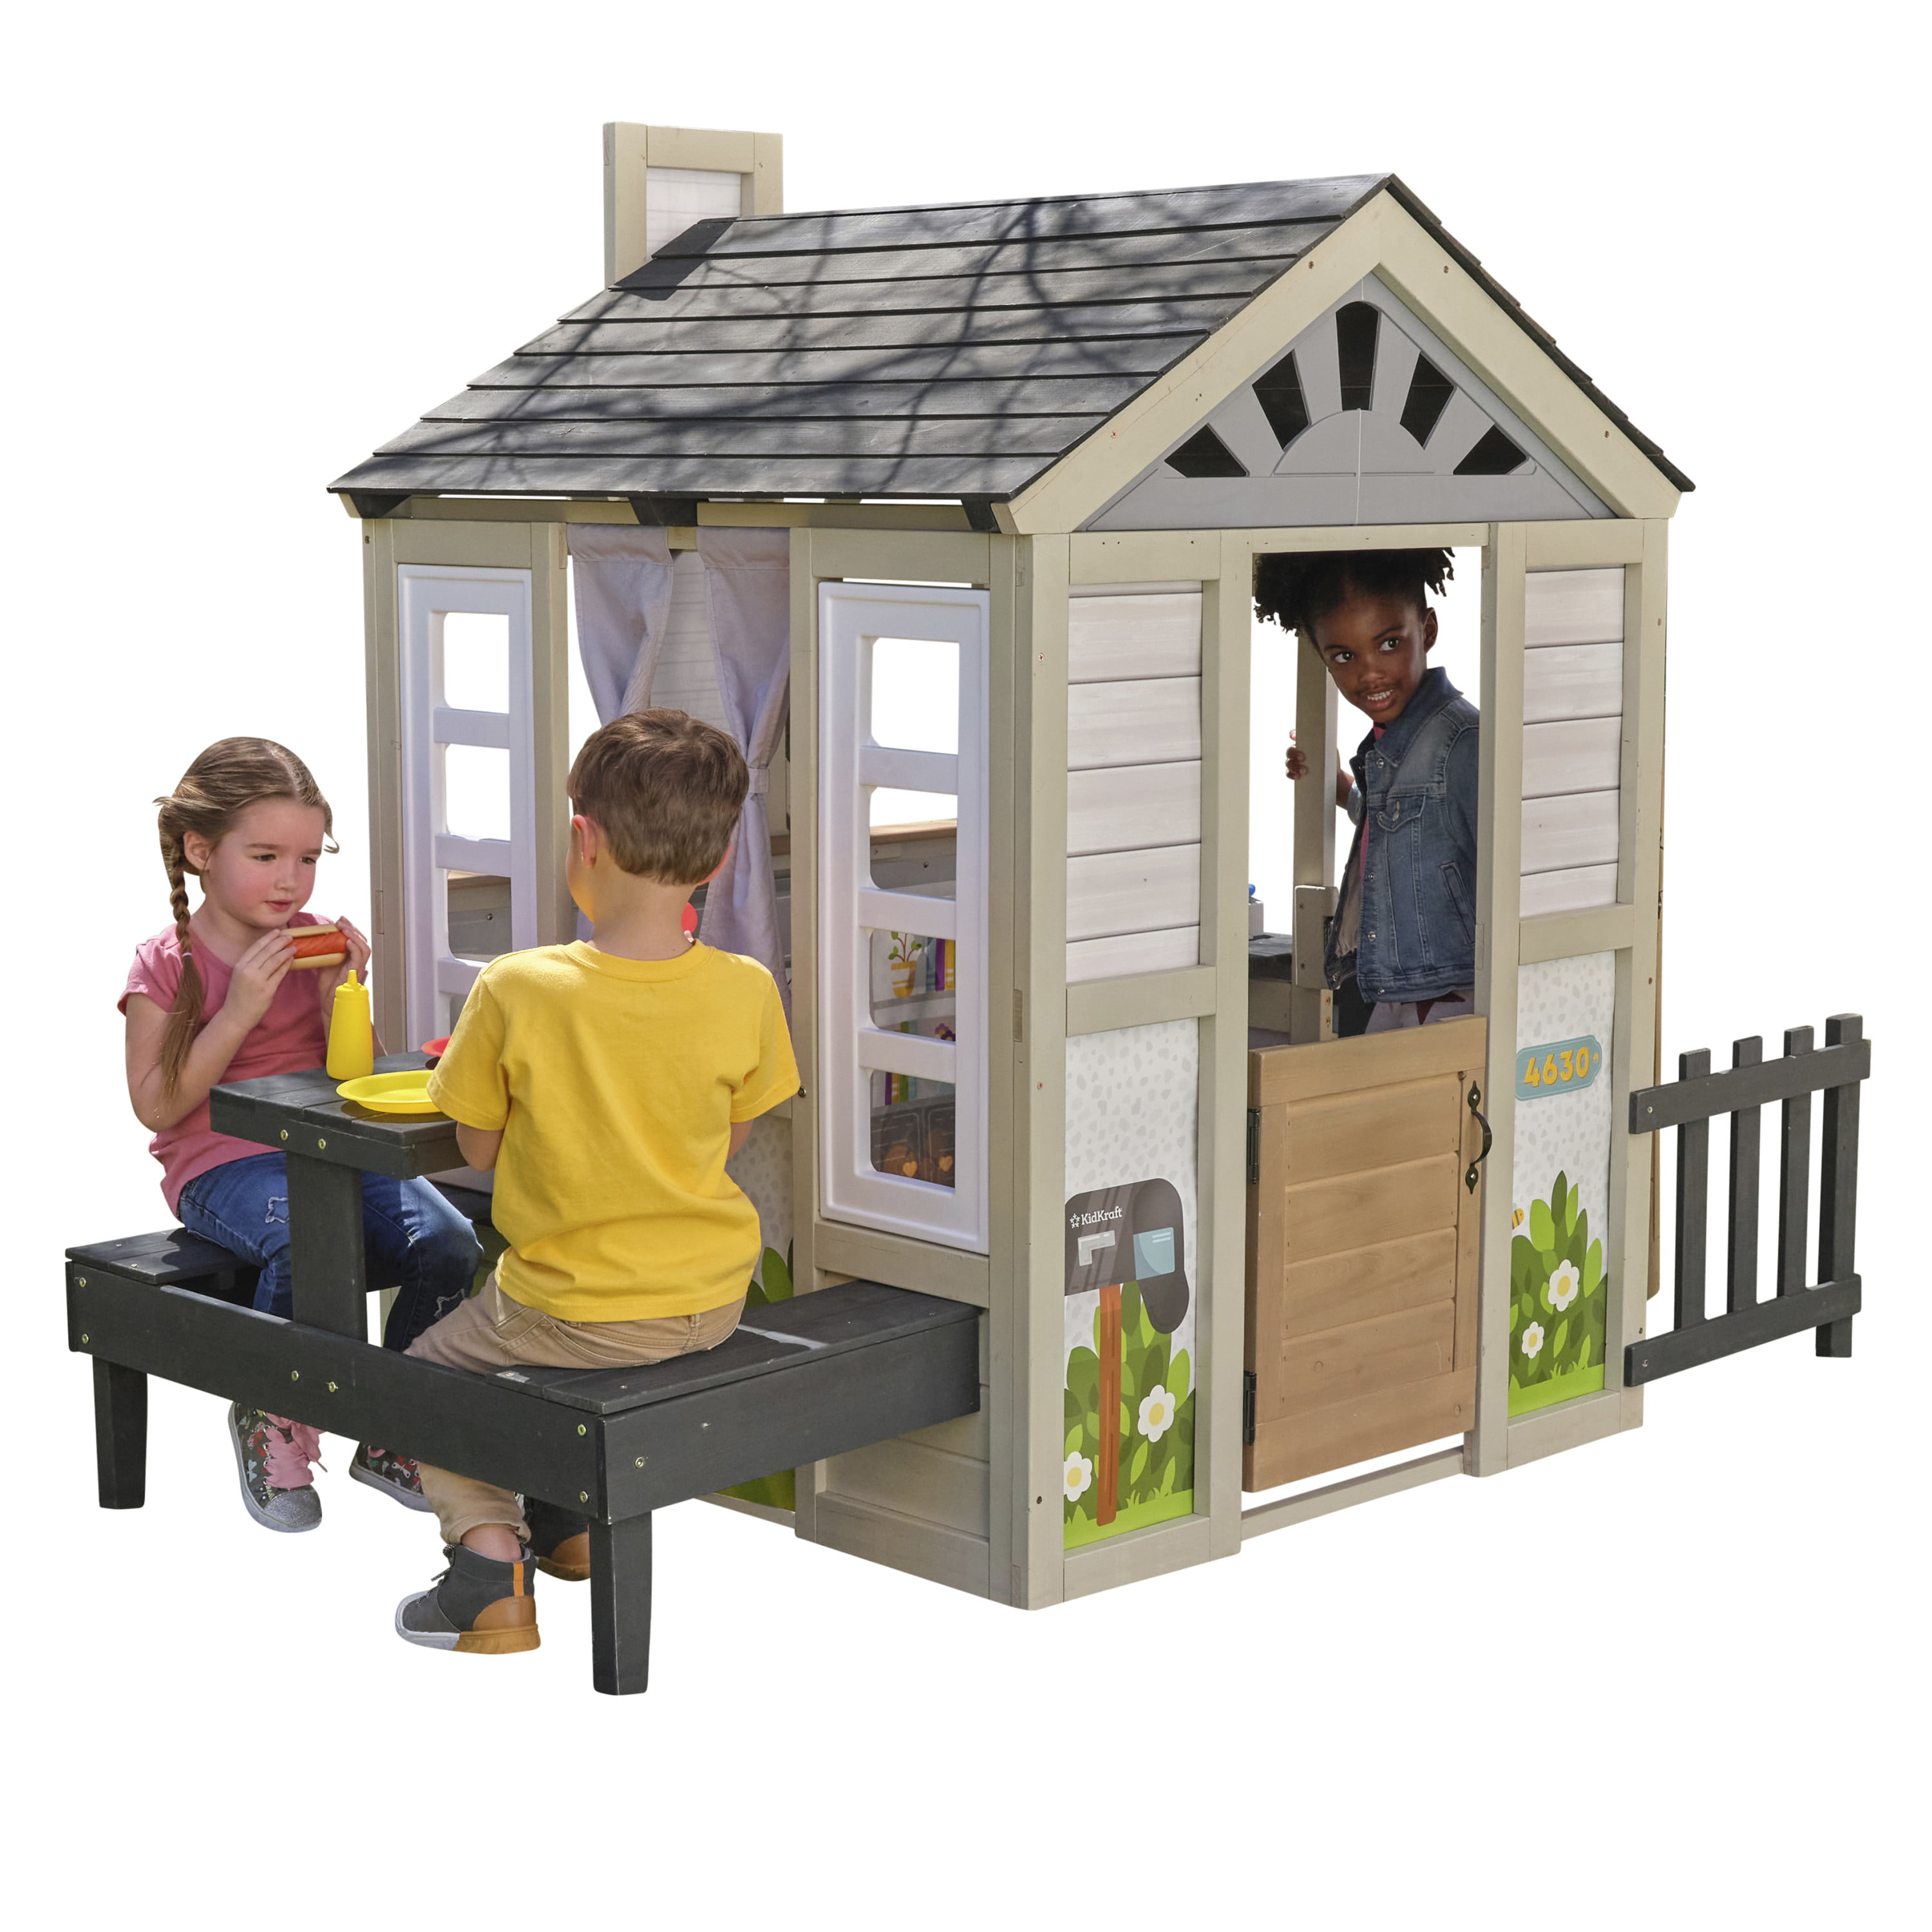 KidKraft Cozy Hearth Cabin Wooden Outdoor Playhouse with Light-Up Fireplace